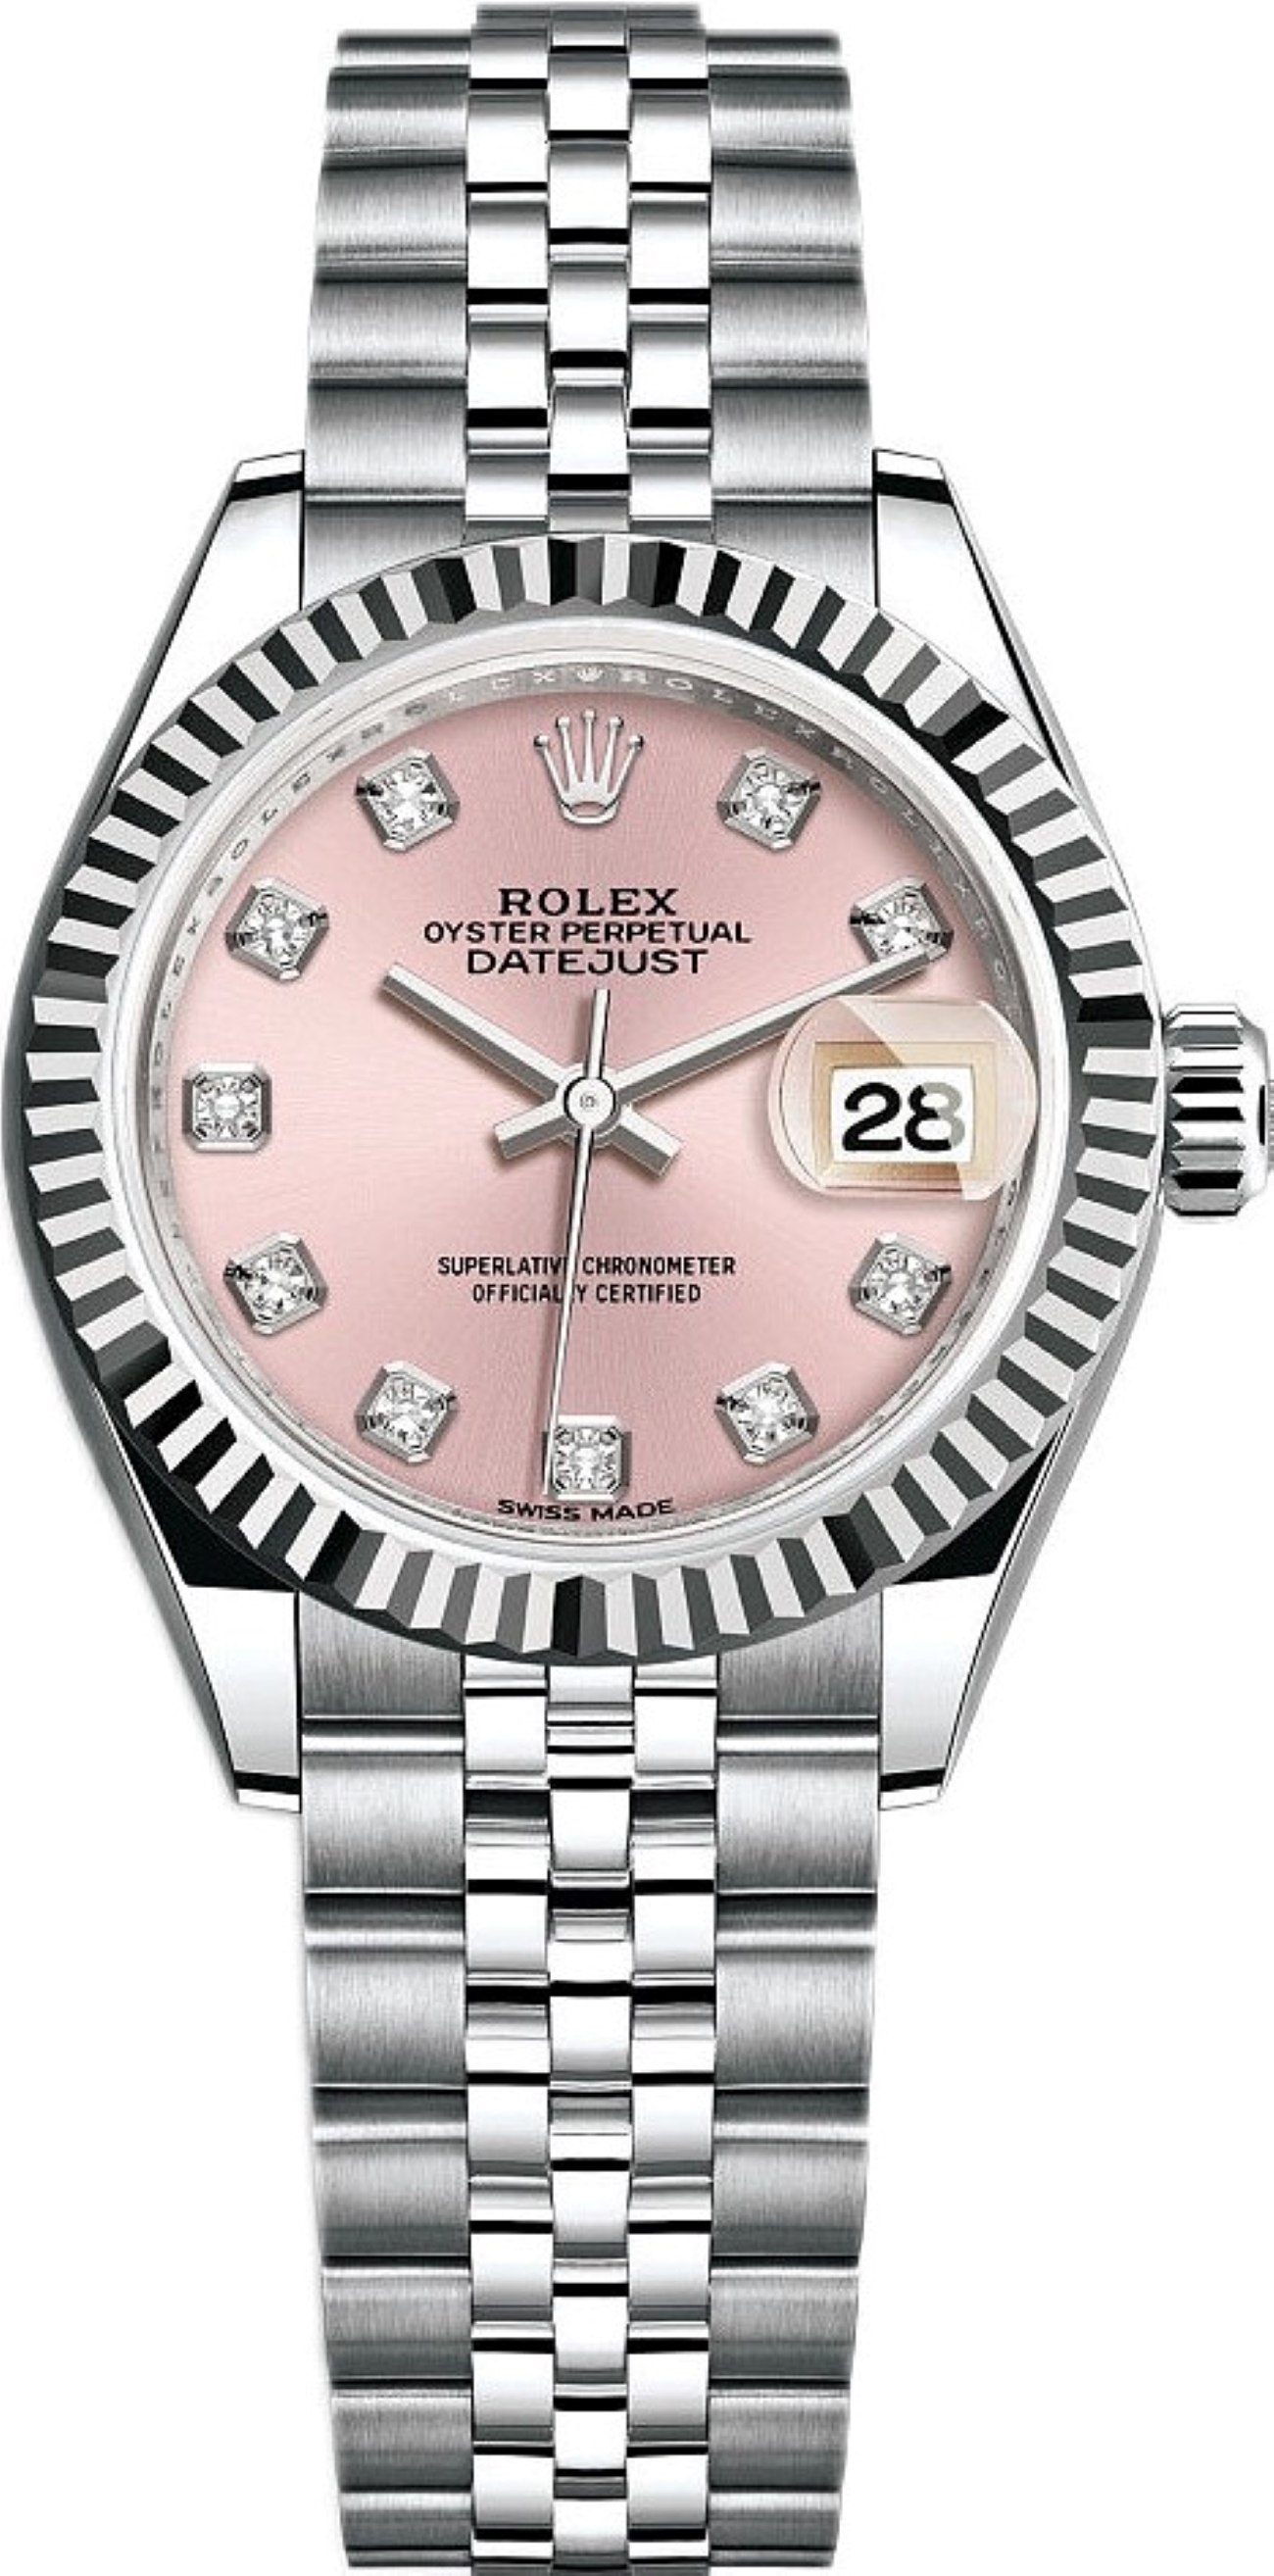 ROLEX LADY DATEJUST 28 WHITE GOLD&STEEL PINK DIAL JUBILEE REF: 279174